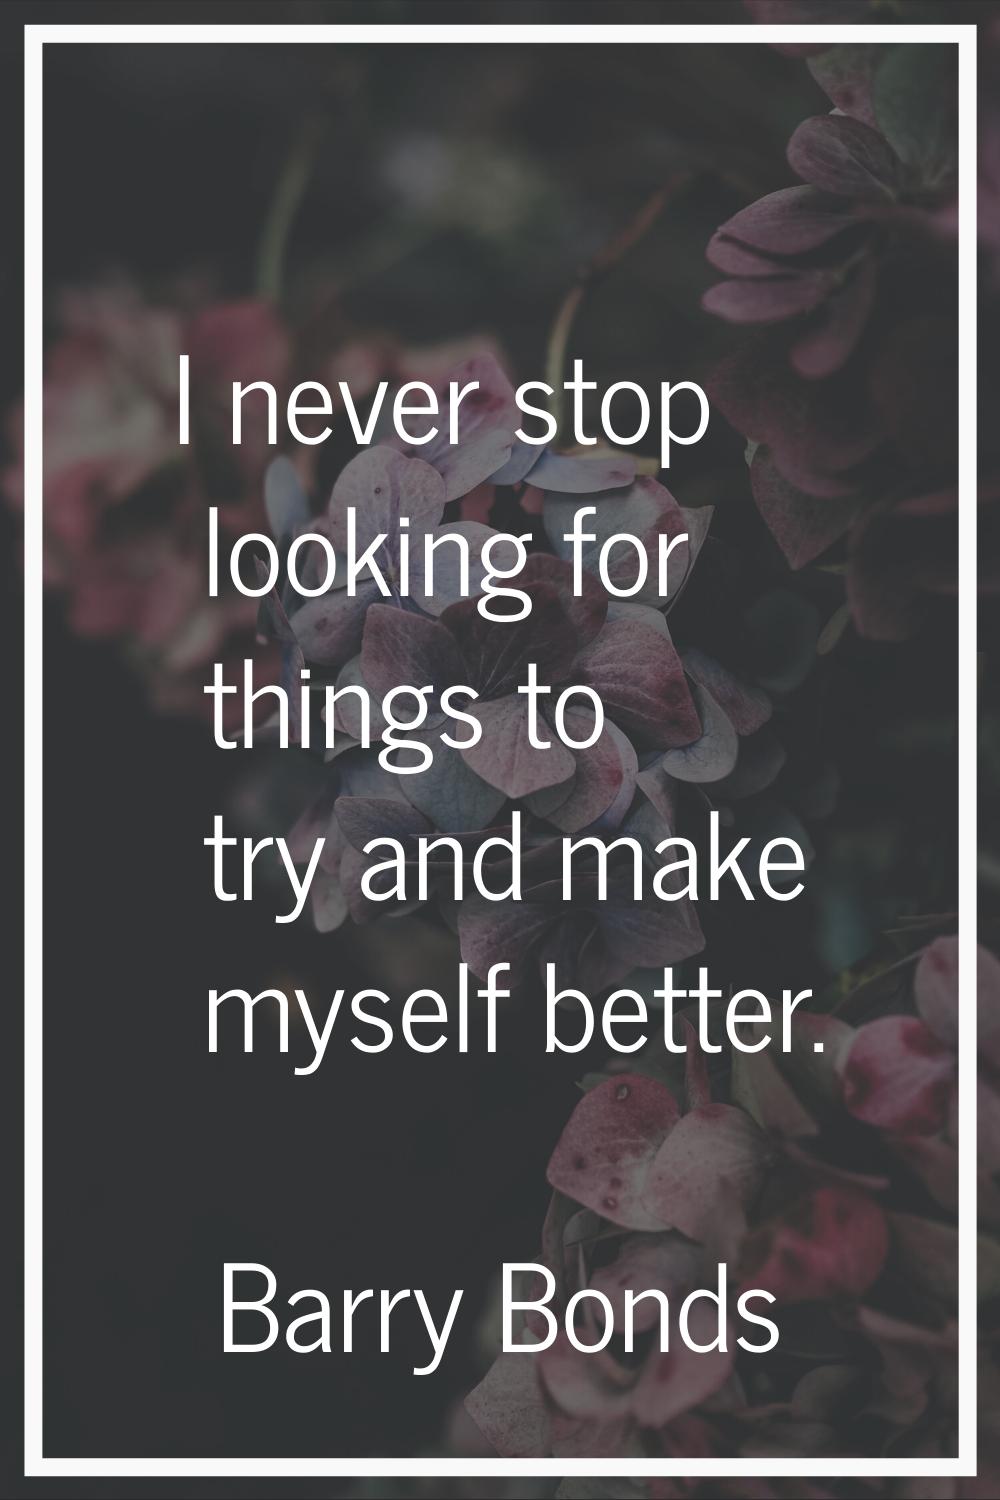 I never stop looking for things to try and make myself better.